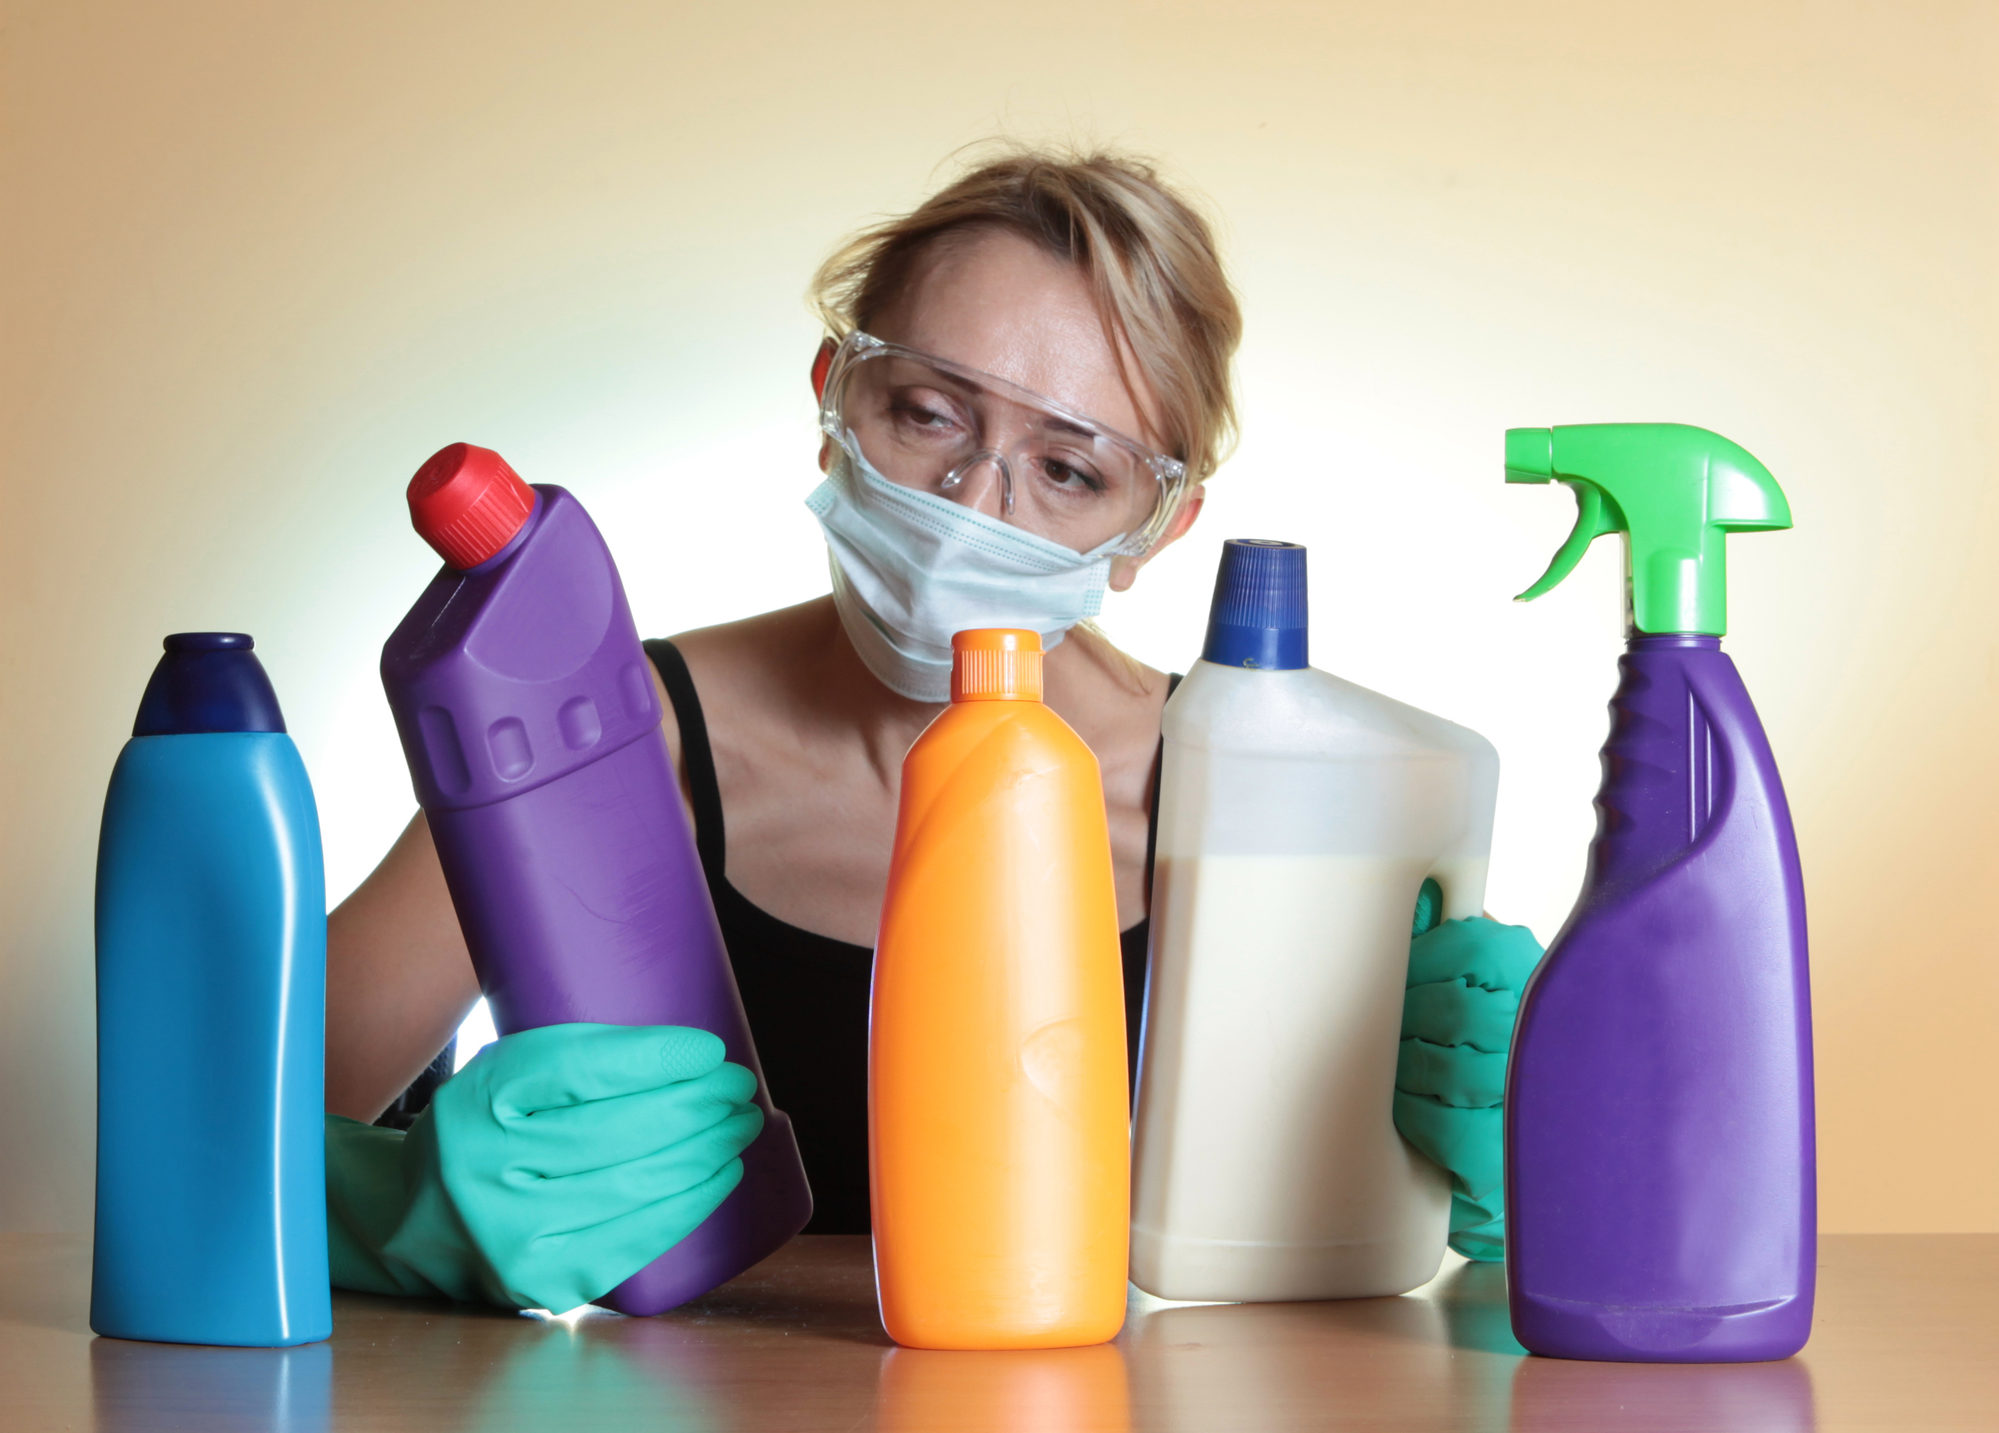 Woman in mask and goggles examines colorful bottles of toxic cleaning products,